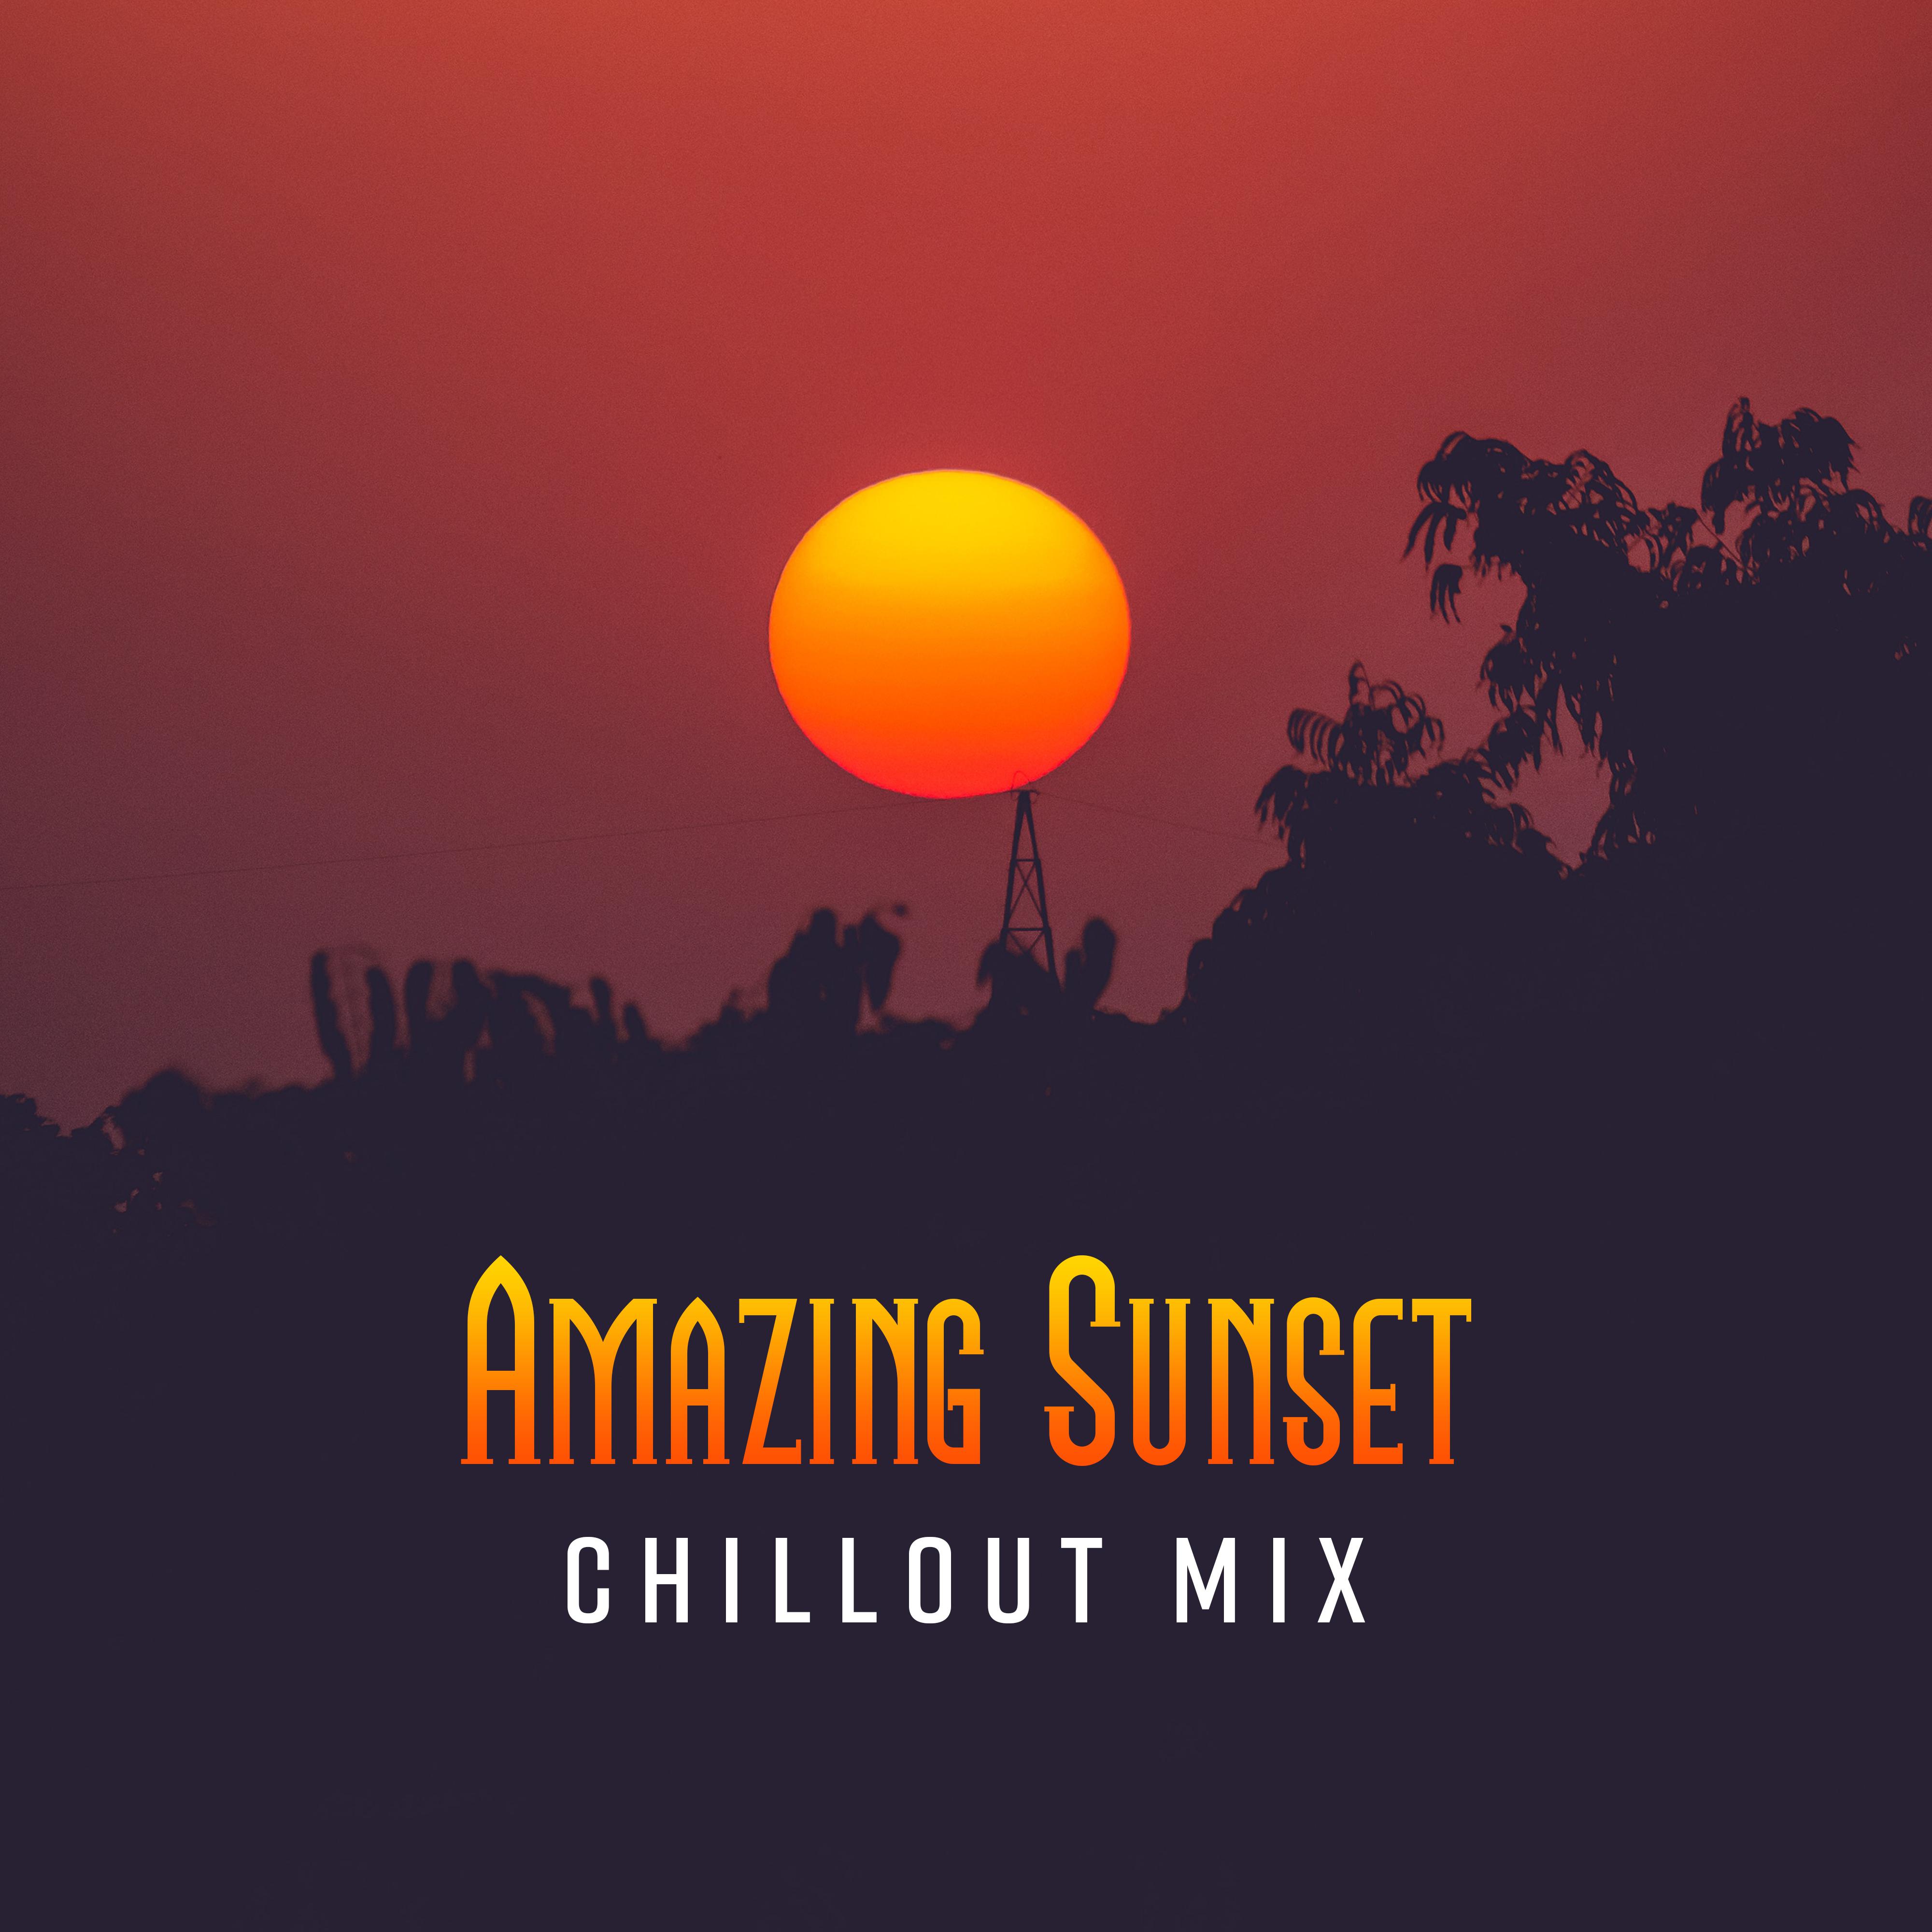 Amazing Sunset Chillout Mix: Compilation of Best 2019 Sunny Soft Chill Out Music, Beautiful Melodies & Deep Slow Beats, Summer Tropical Vacation Anthems, Hot Beach Songs